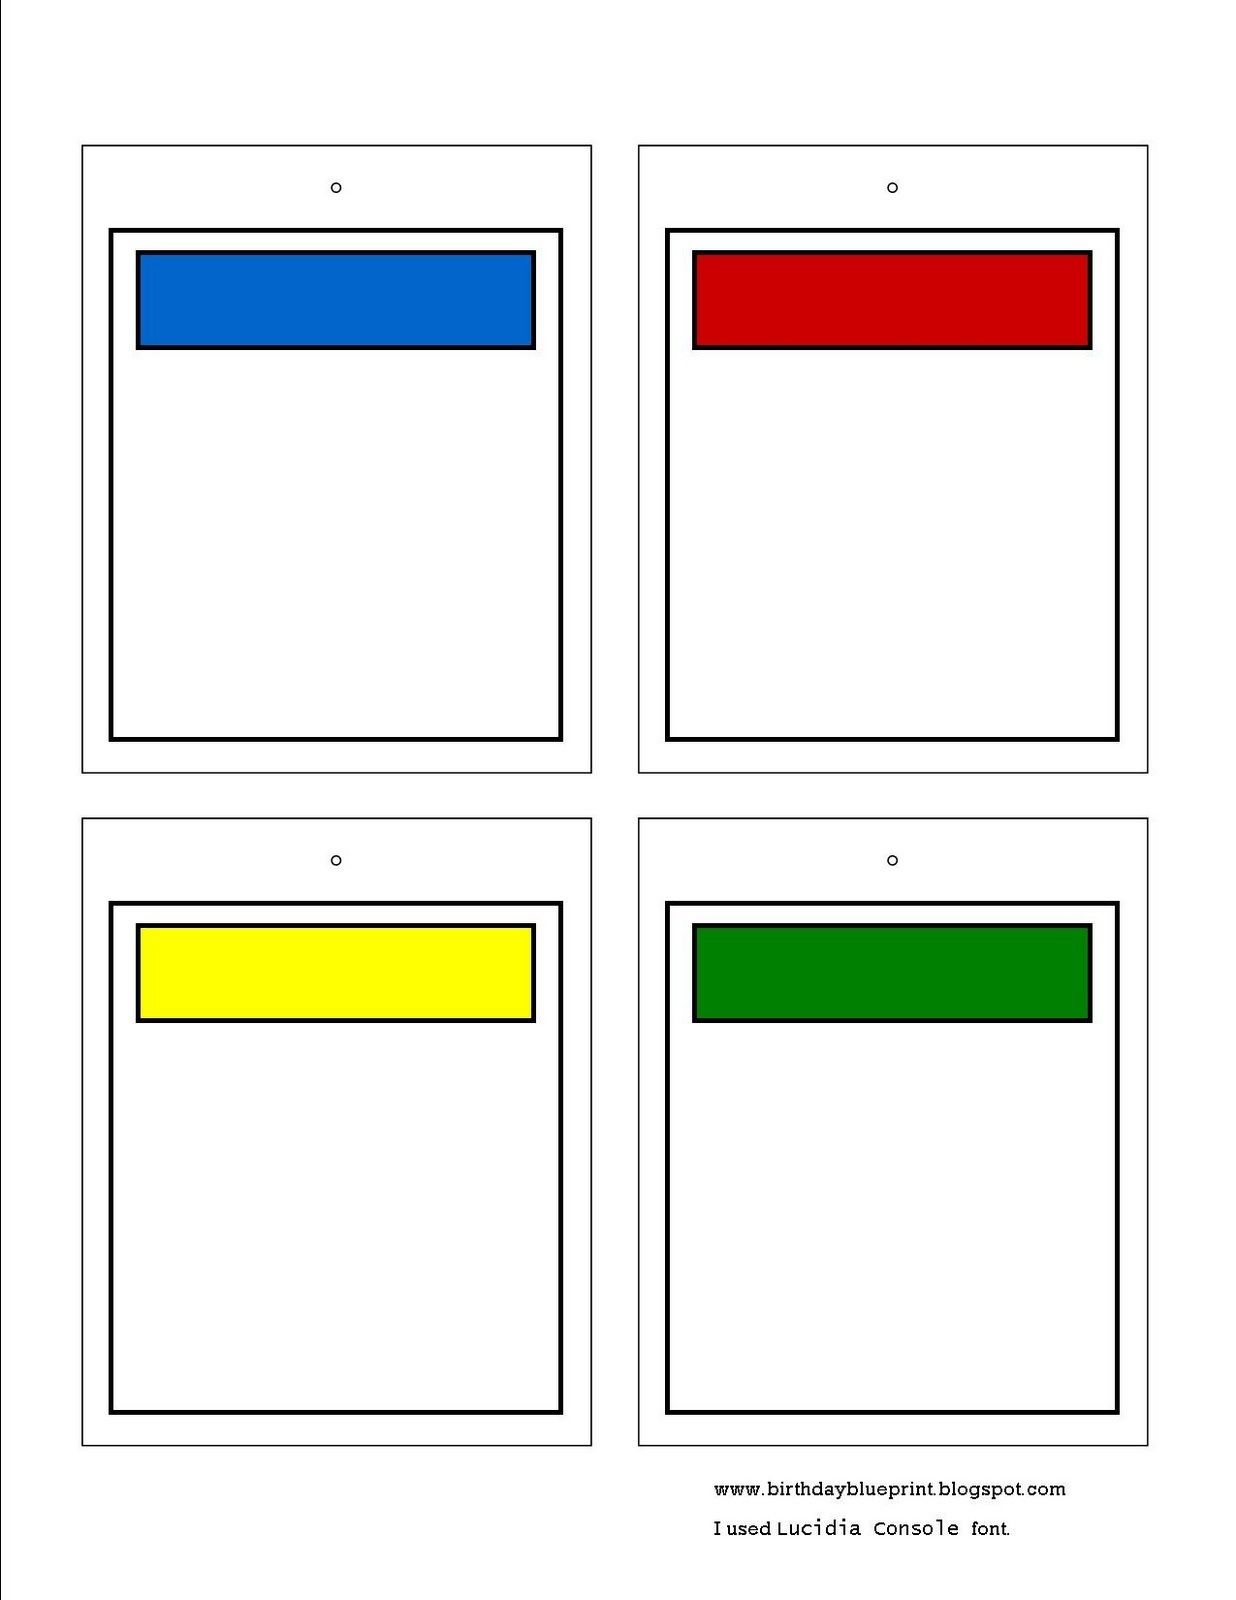 Blank Monopoly Property Cards. To Write In The Bible Memory Pertaining To Monopoly Property Card Template